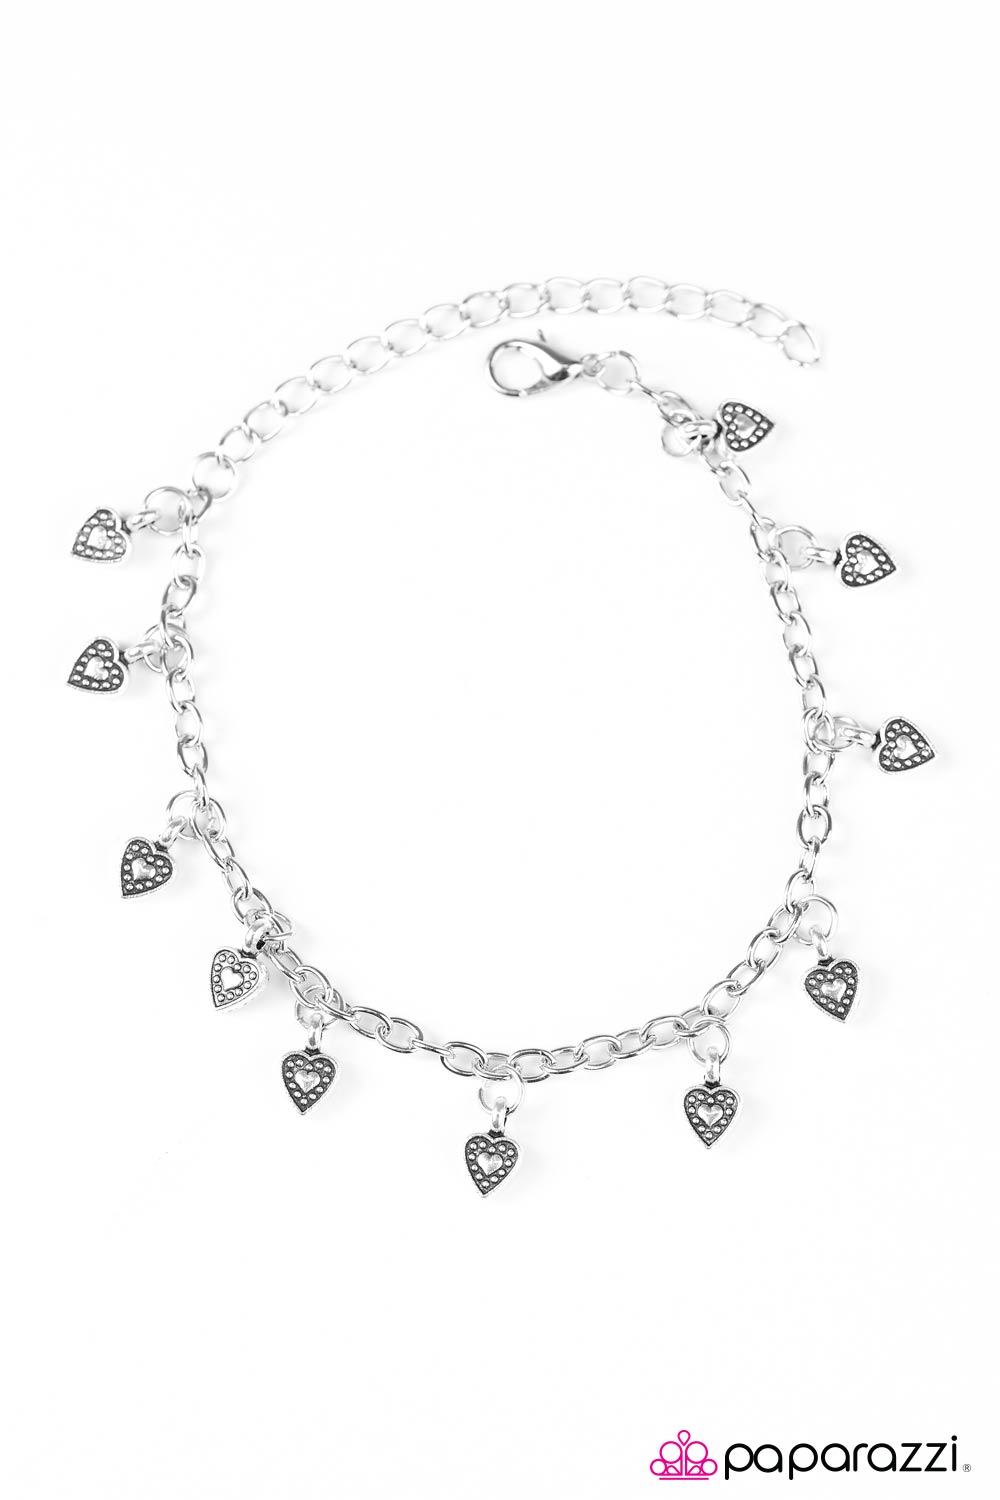 Paparazzi Accessories Closer To The Heart - Silver Bracelet 